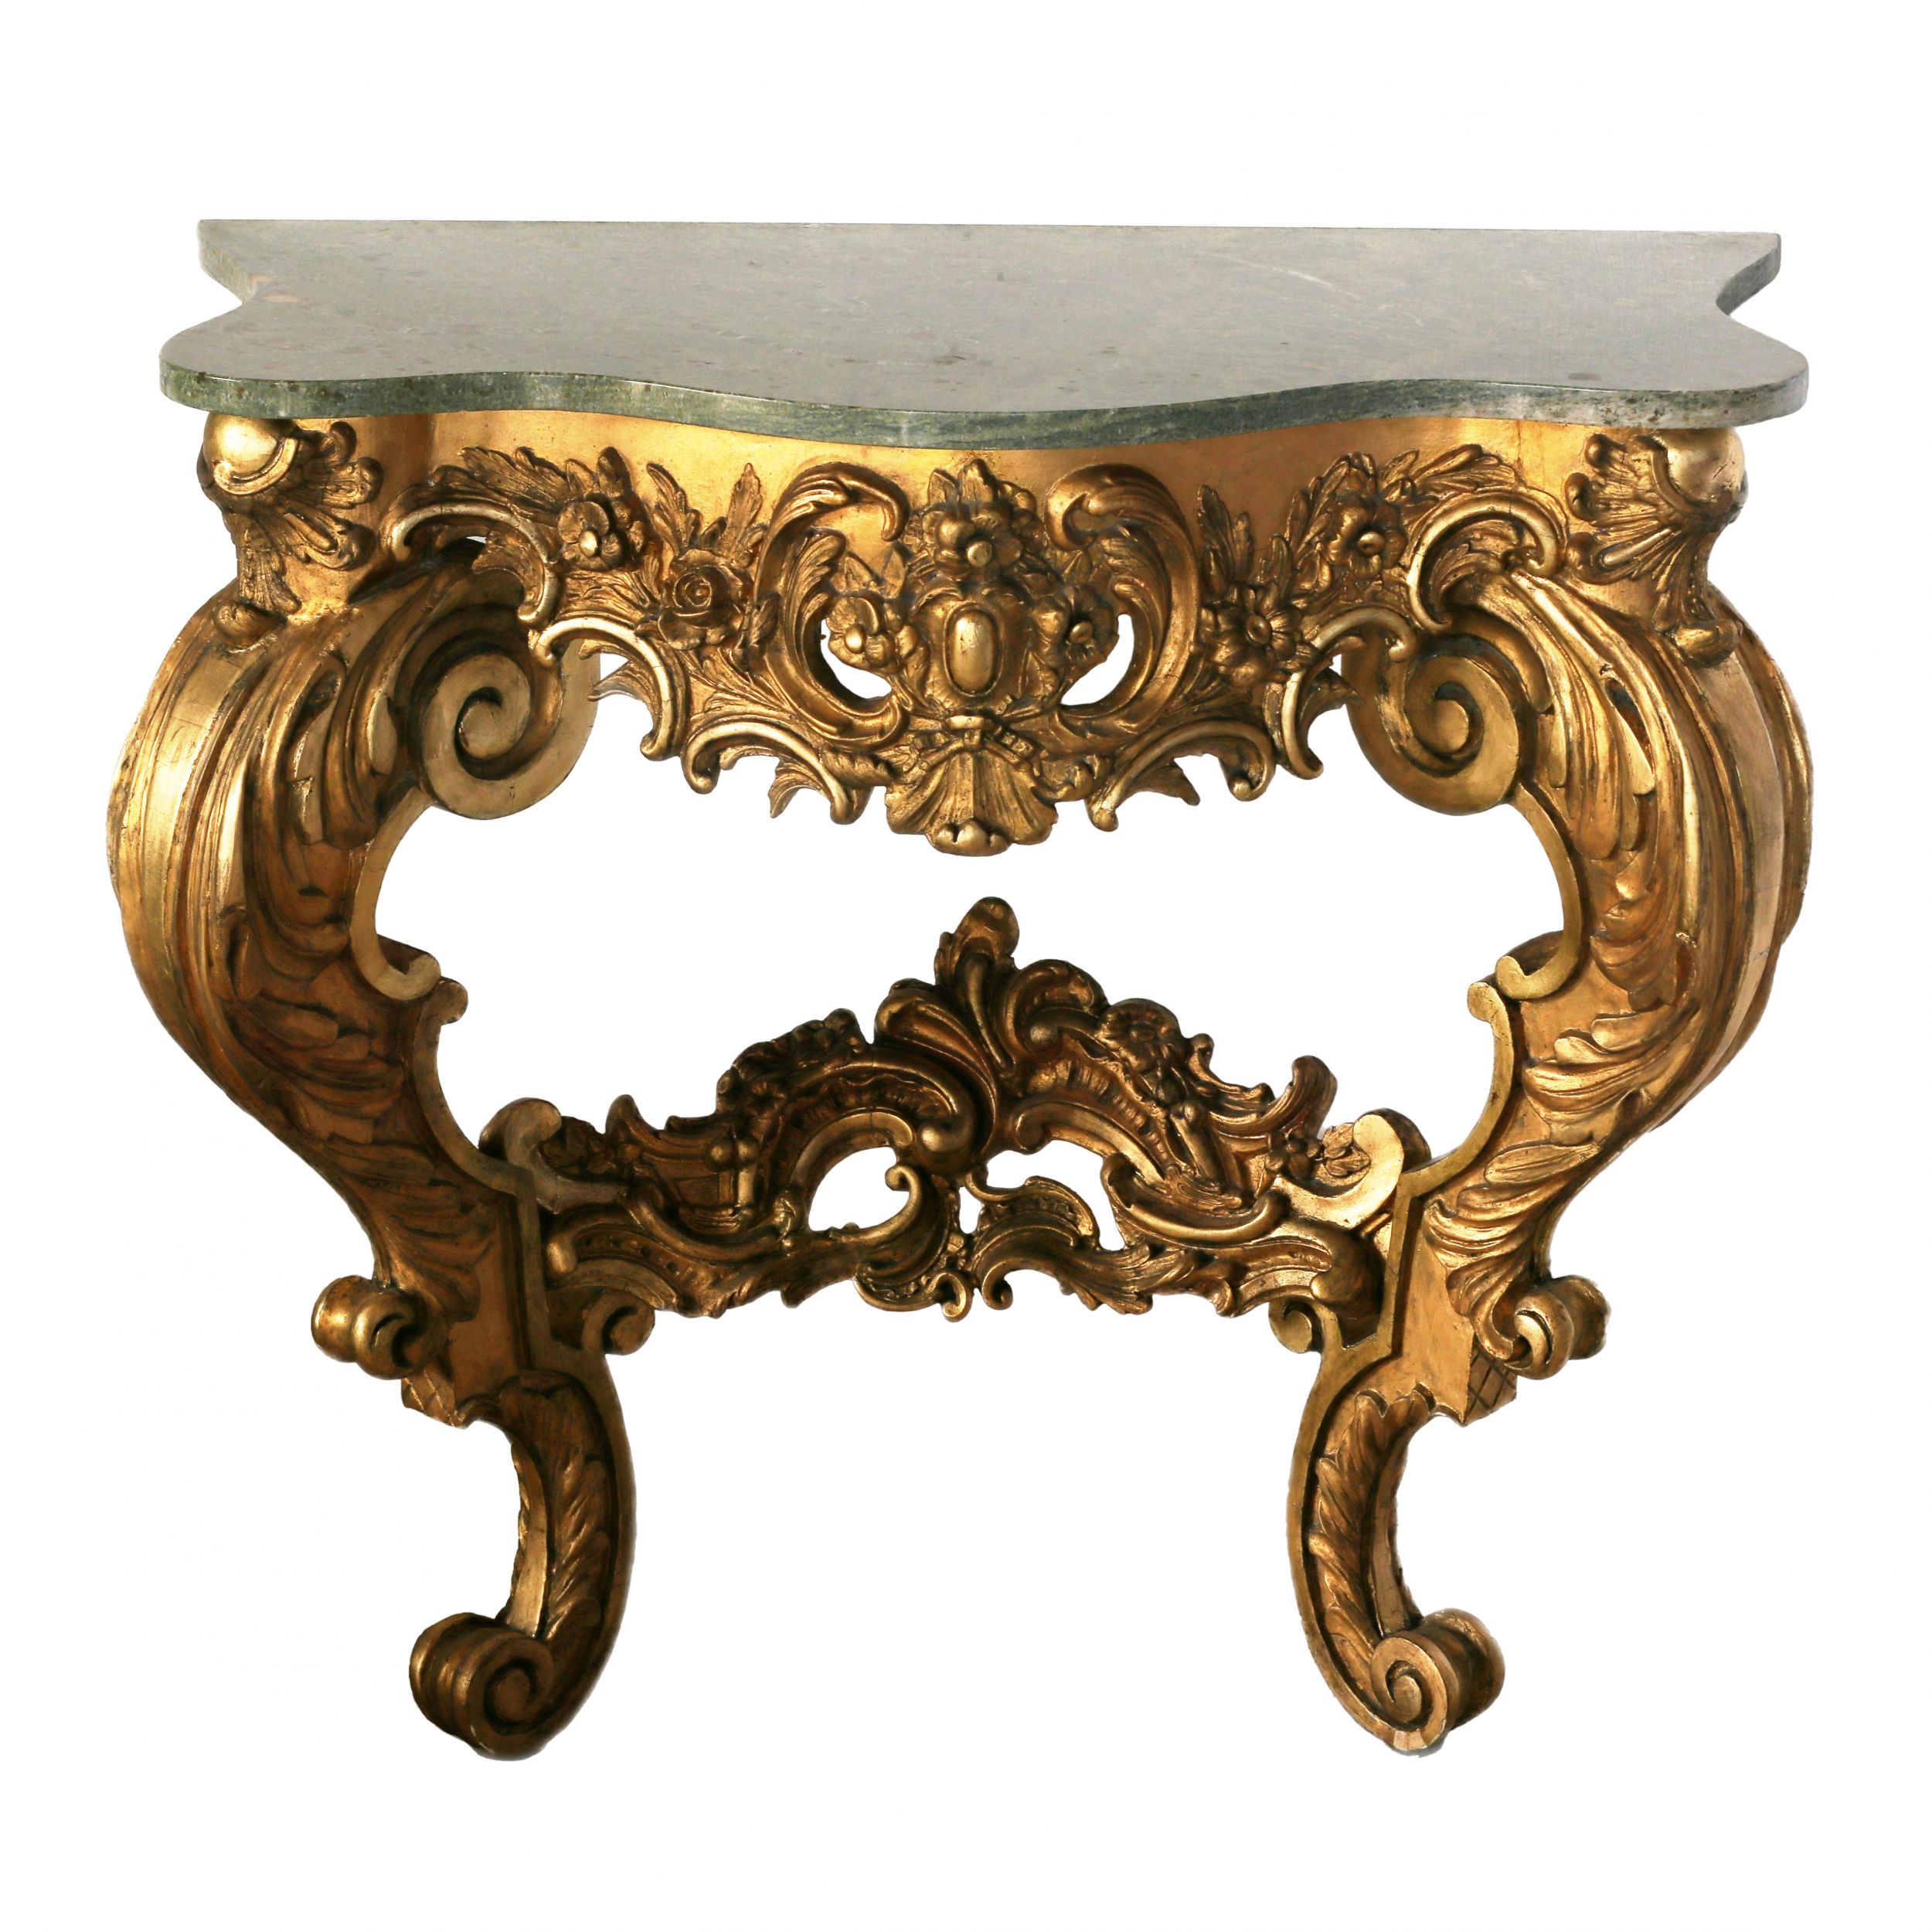 Wooden-gilded-console-of-the-19th-century-